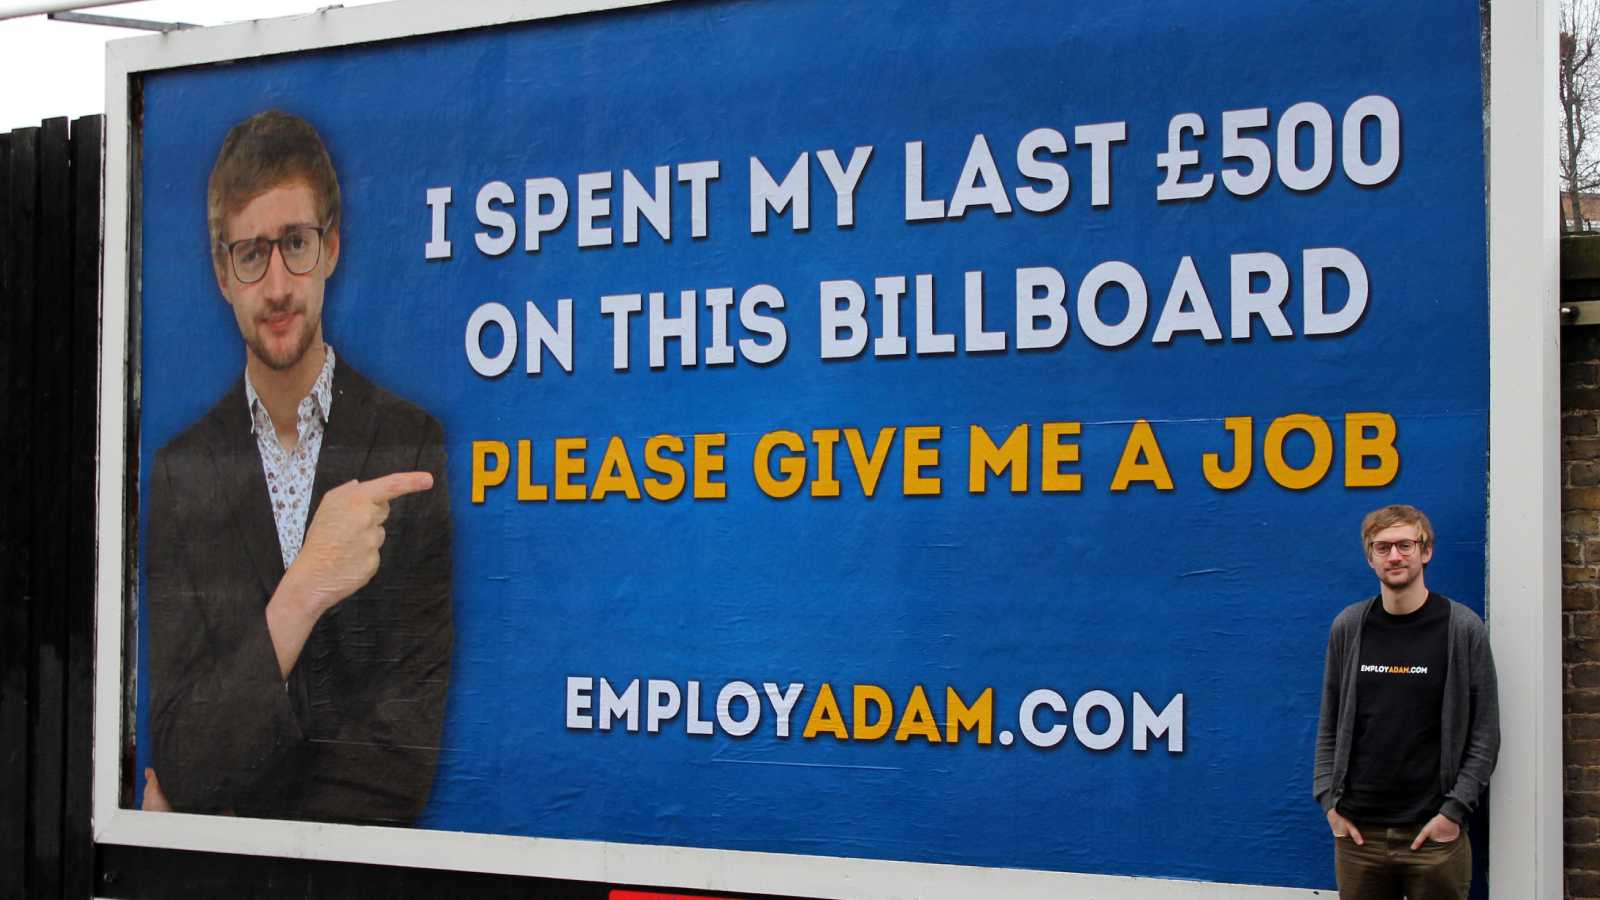 The graduate who spent his last £500 on a billboard begging for a job